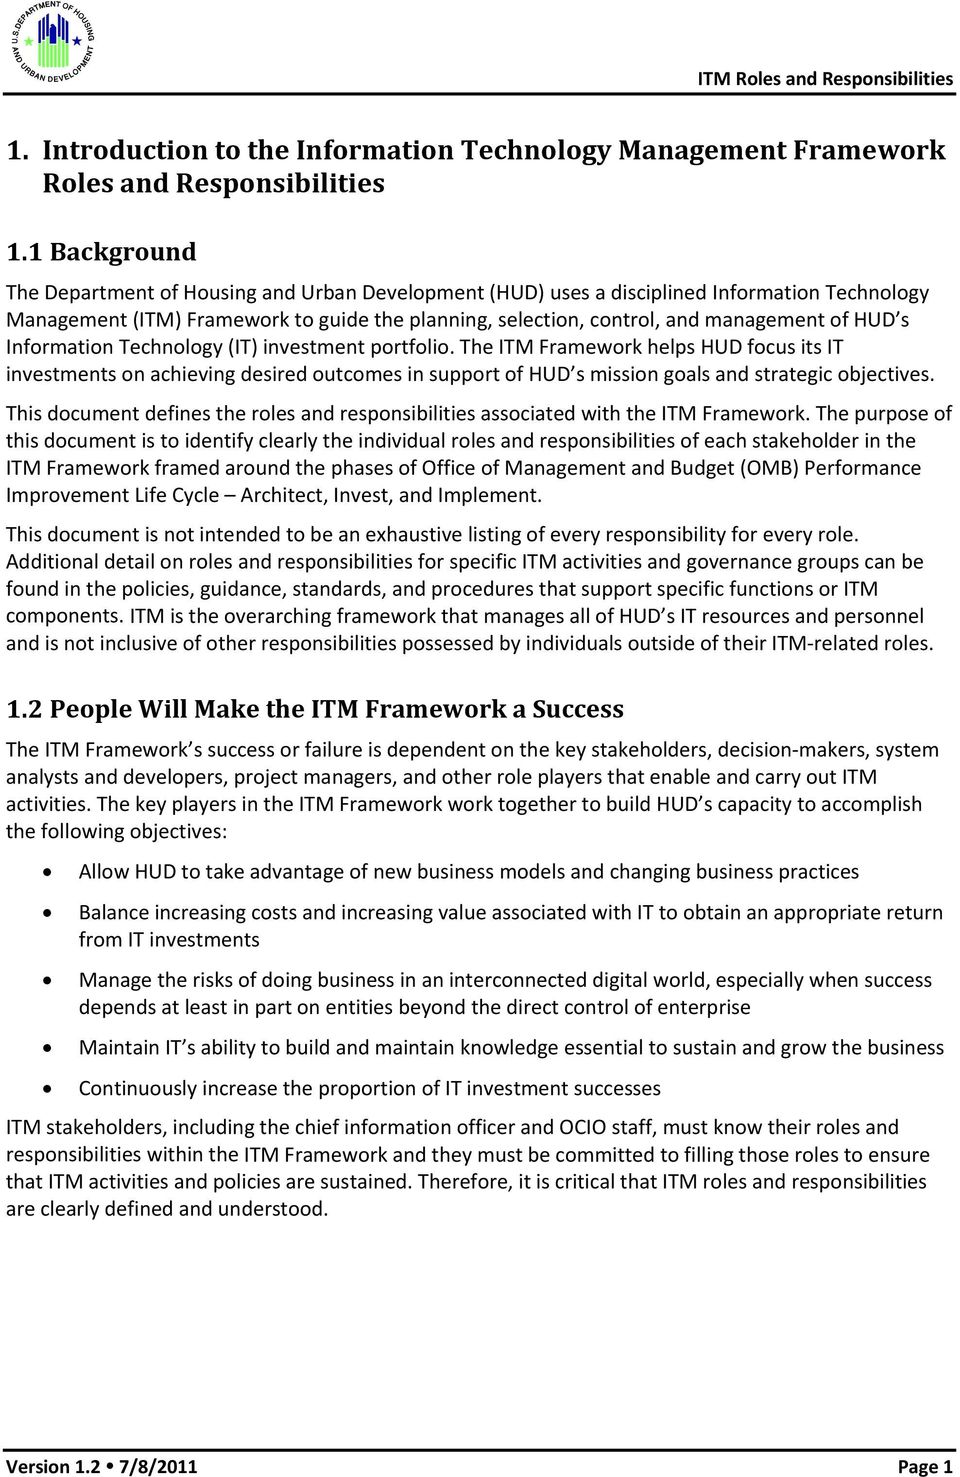 HUD s Information Technology (IT) investment portfolio. The ITM Framework helps HUD focus its IT investments on achieving desired outcomes in support of HUD s mission goals and strategic objectives.